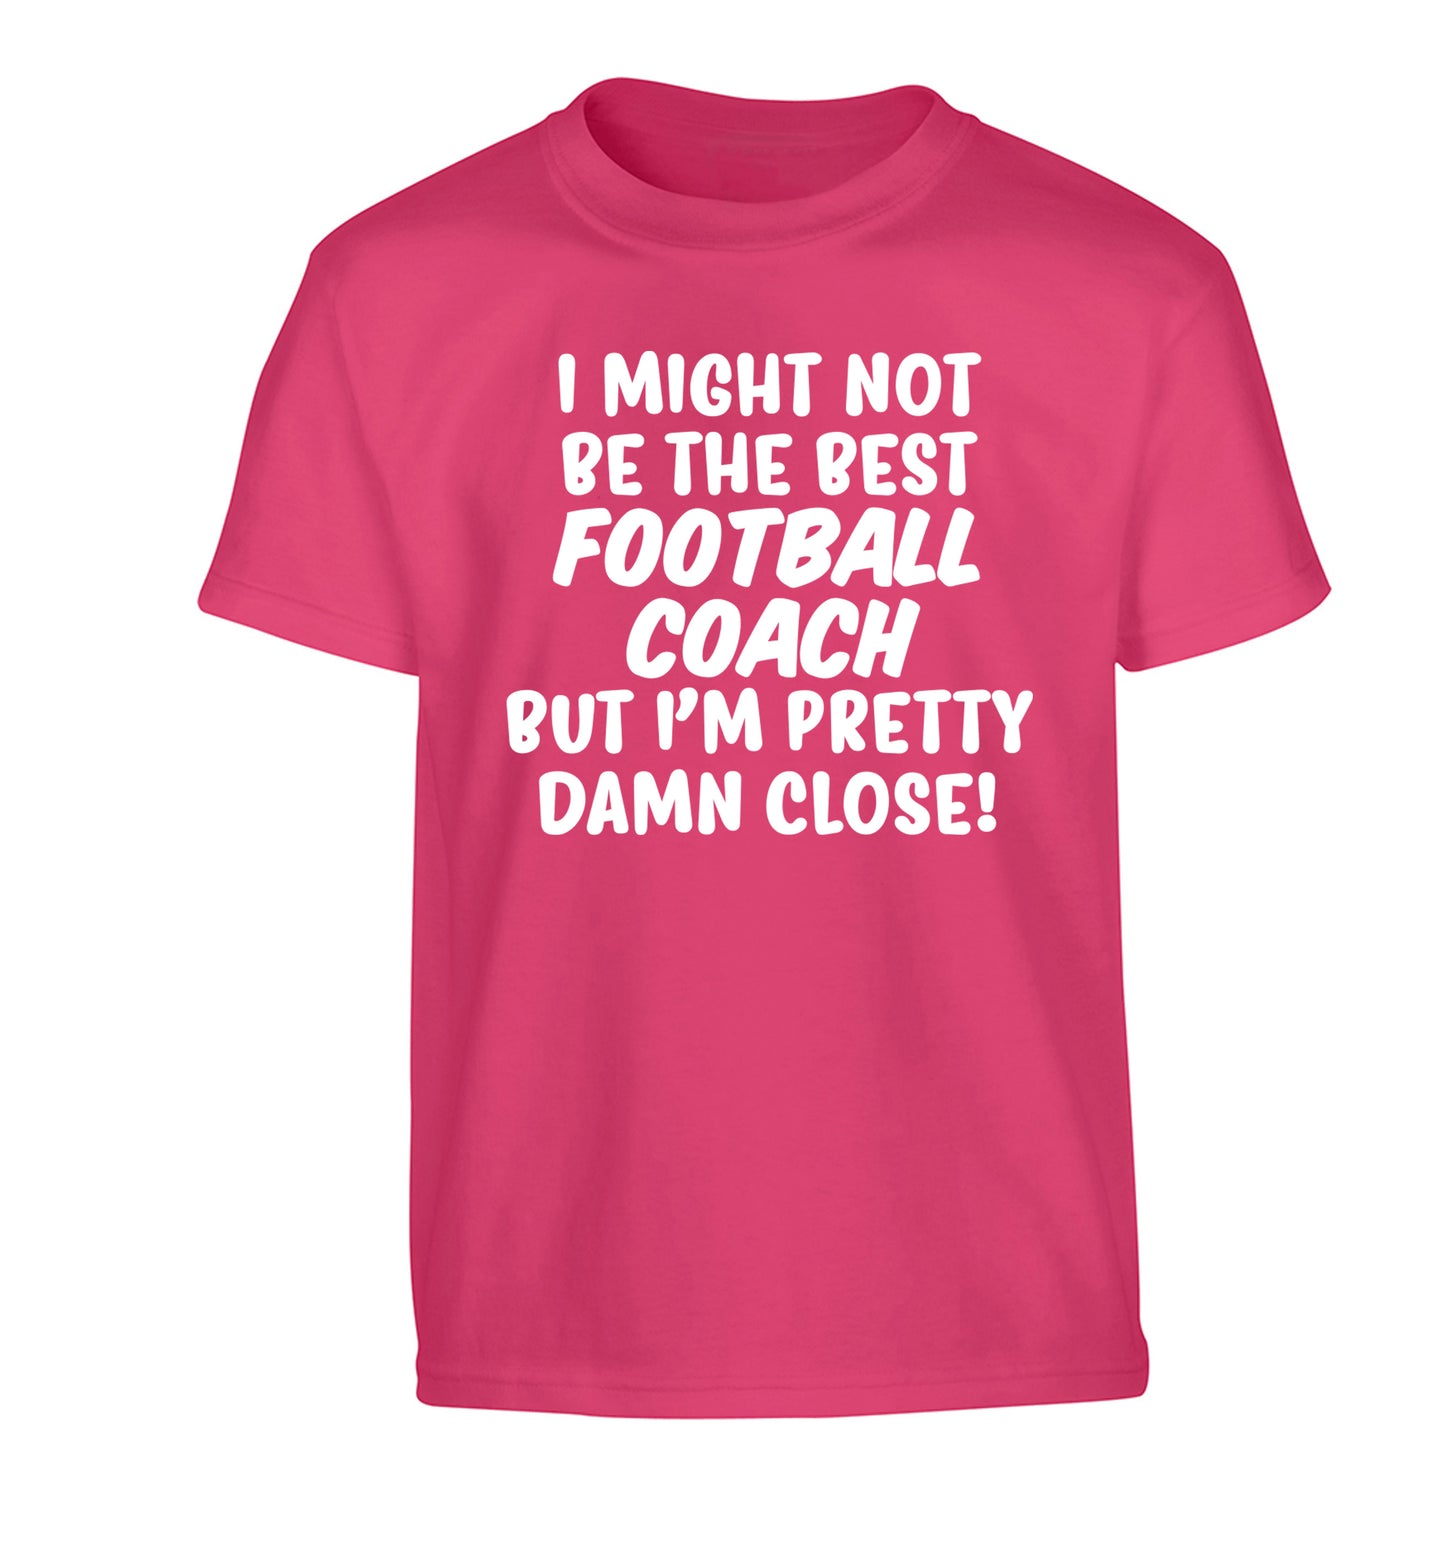 I might not be the best football coach but I'm pretty close! Children's pink Tshirt 12-14 Years